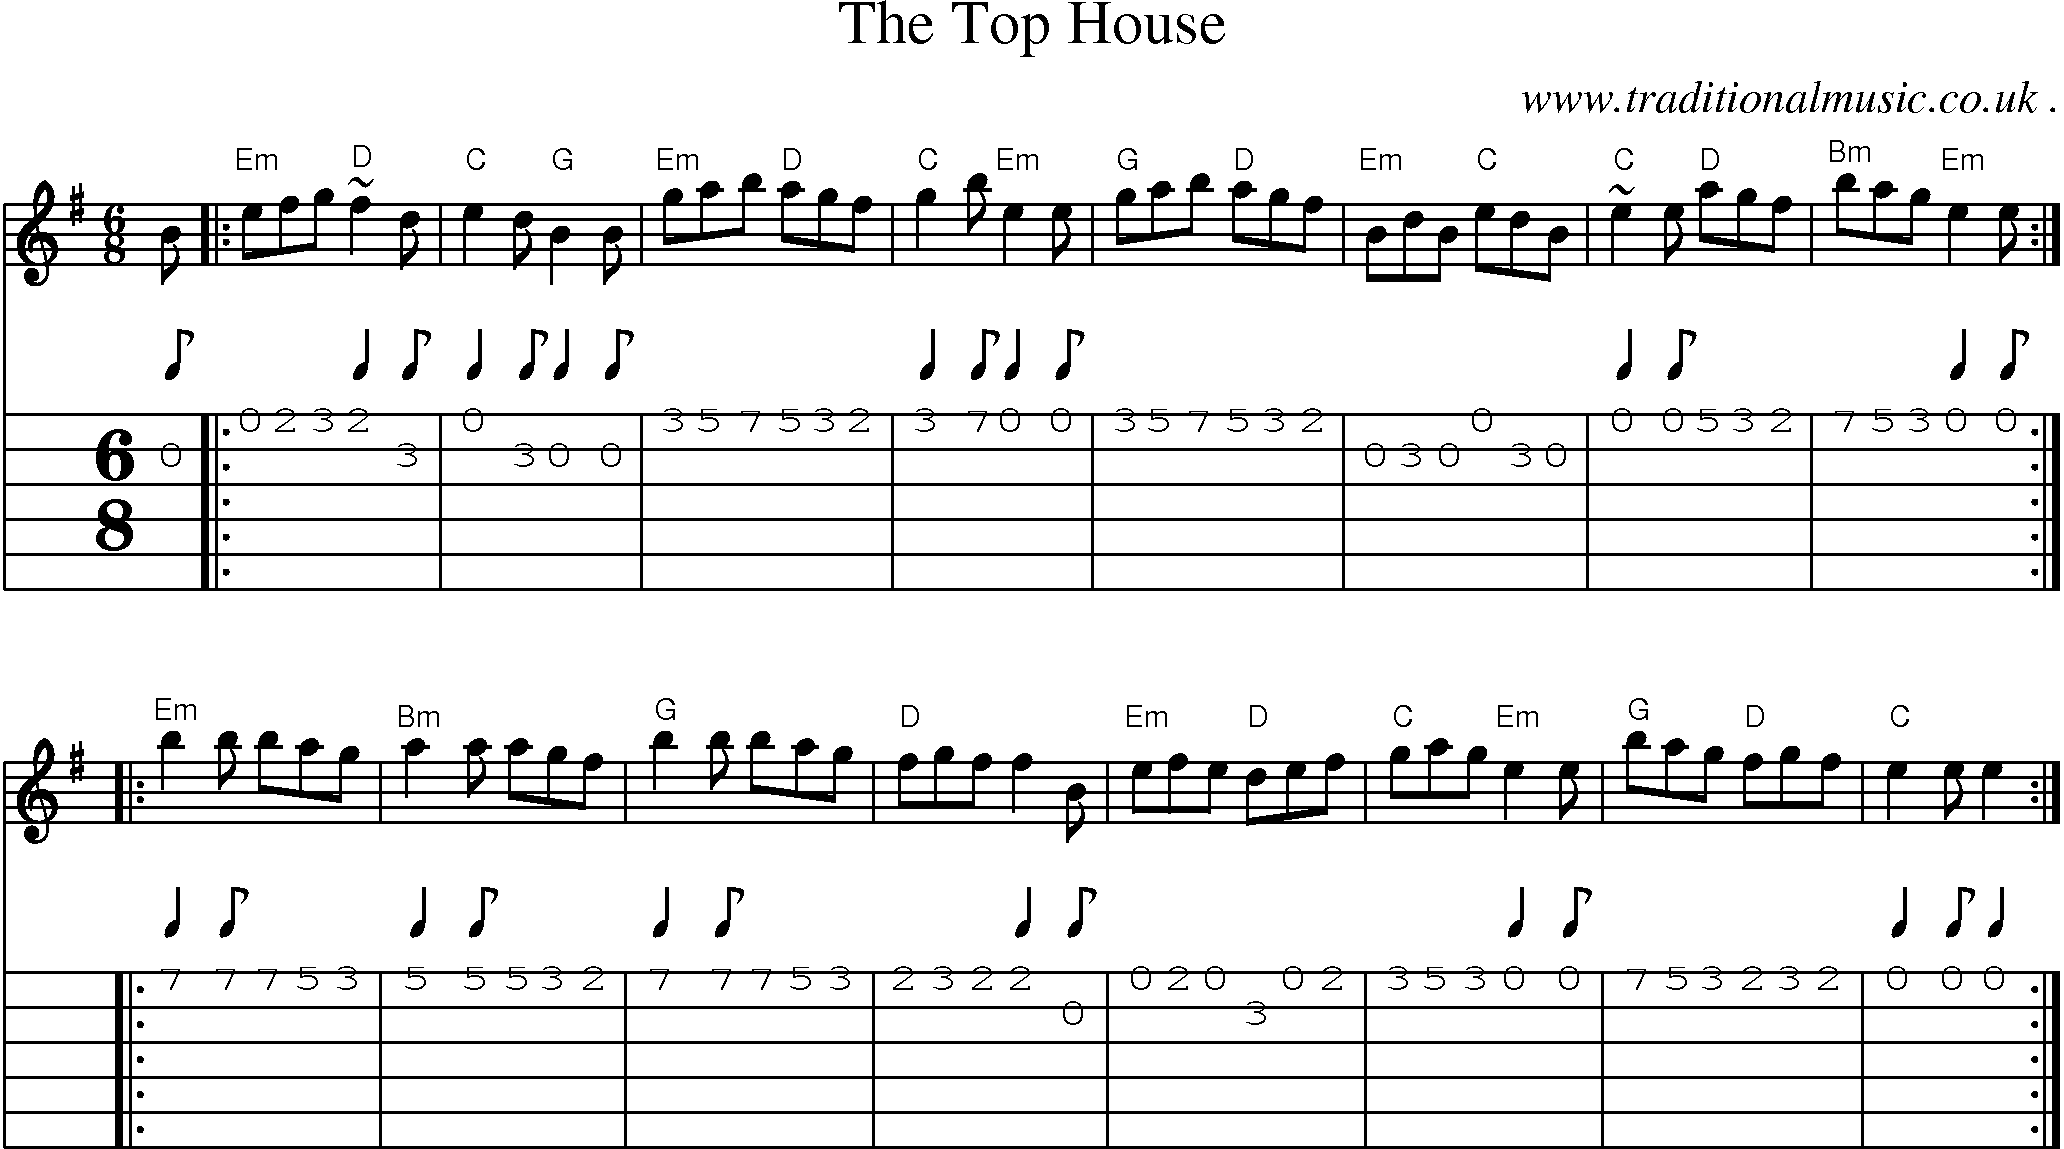 Sheet-music  score, Chords and Guitar Tabs for The Top House